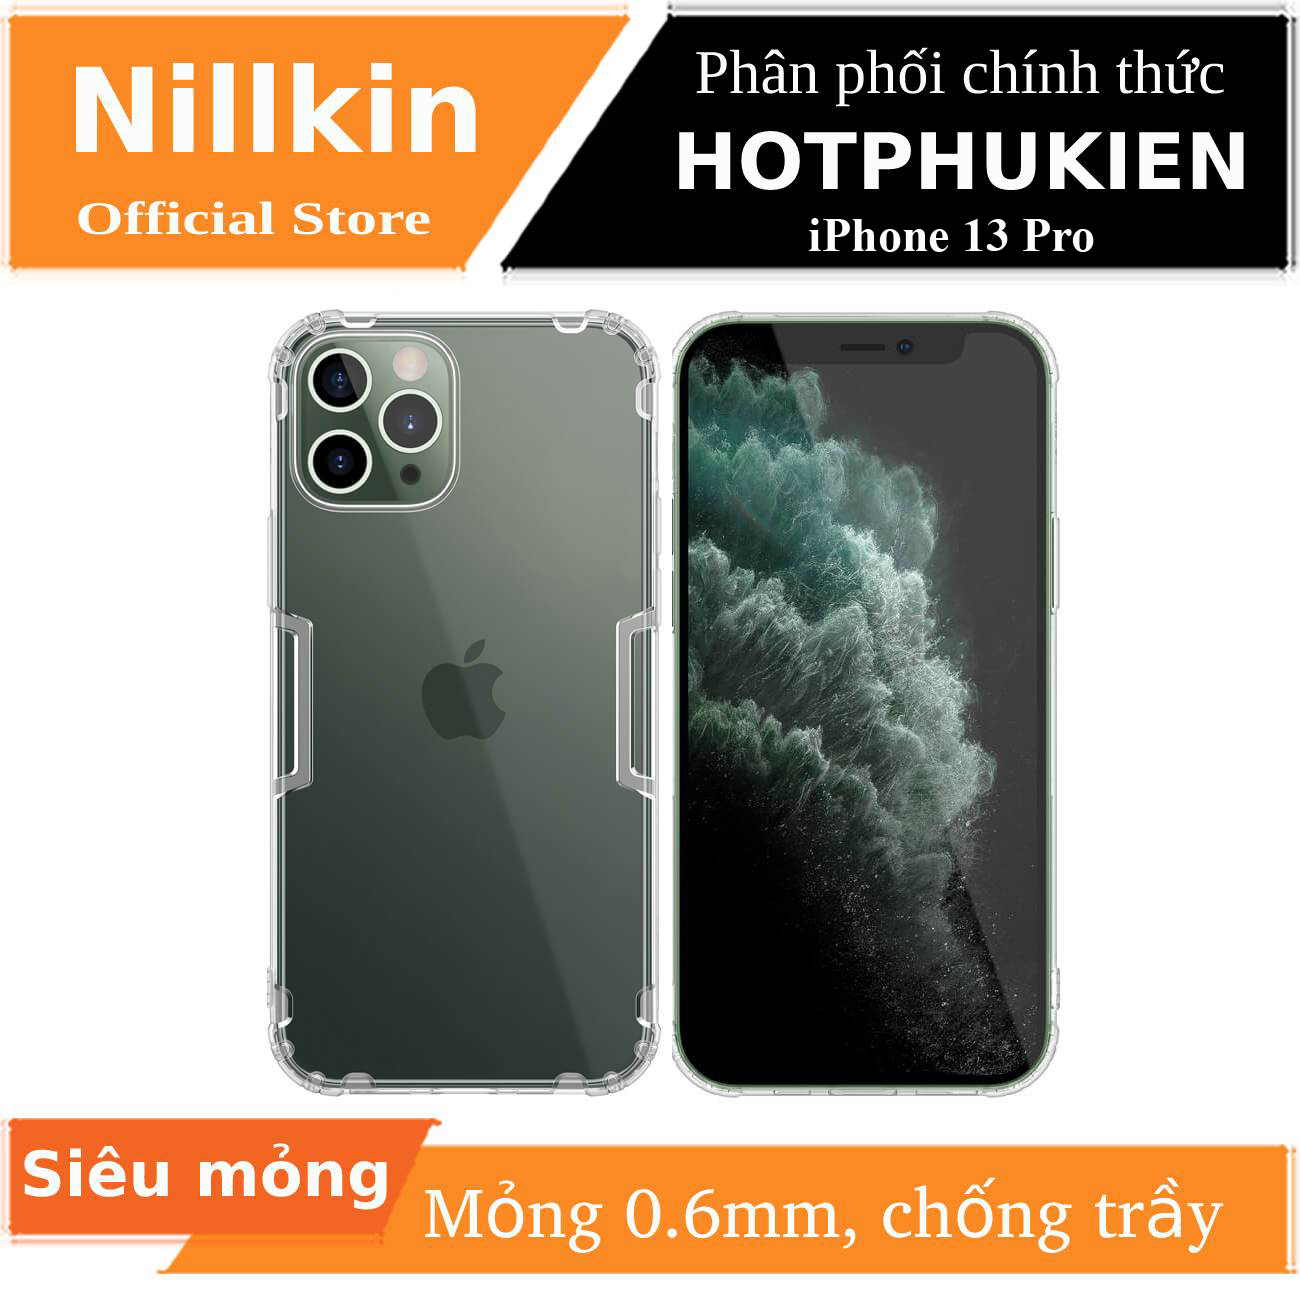 Ốp lưng silicon dẻo trong suốt cho iPhone 13 / iPhone 13 Pro hiệu Nillkin mỏng 0.6mm